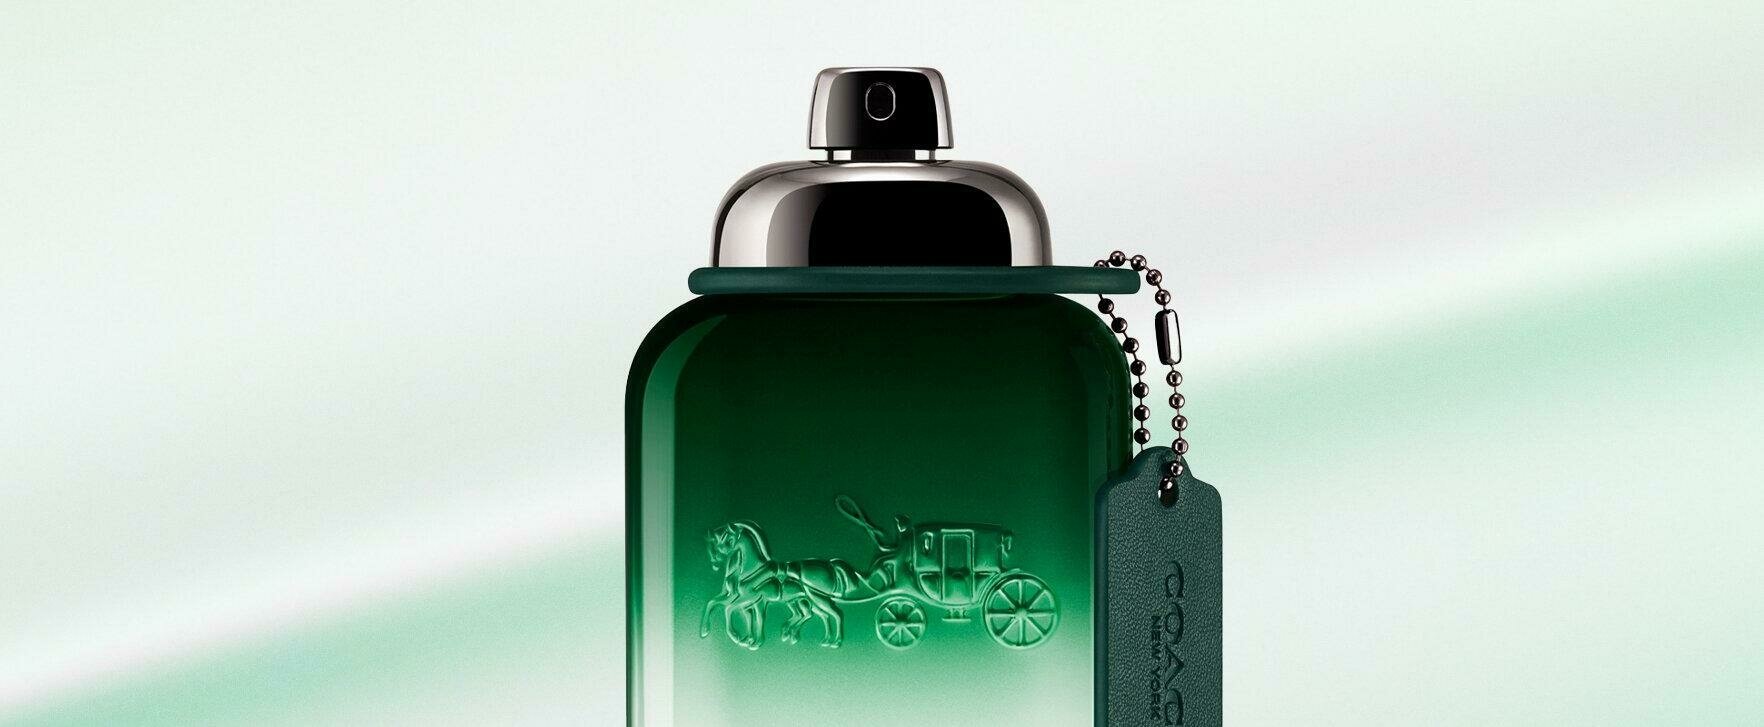 The Fragrance of the Green Oasis: Coach Presents "Coach Green"